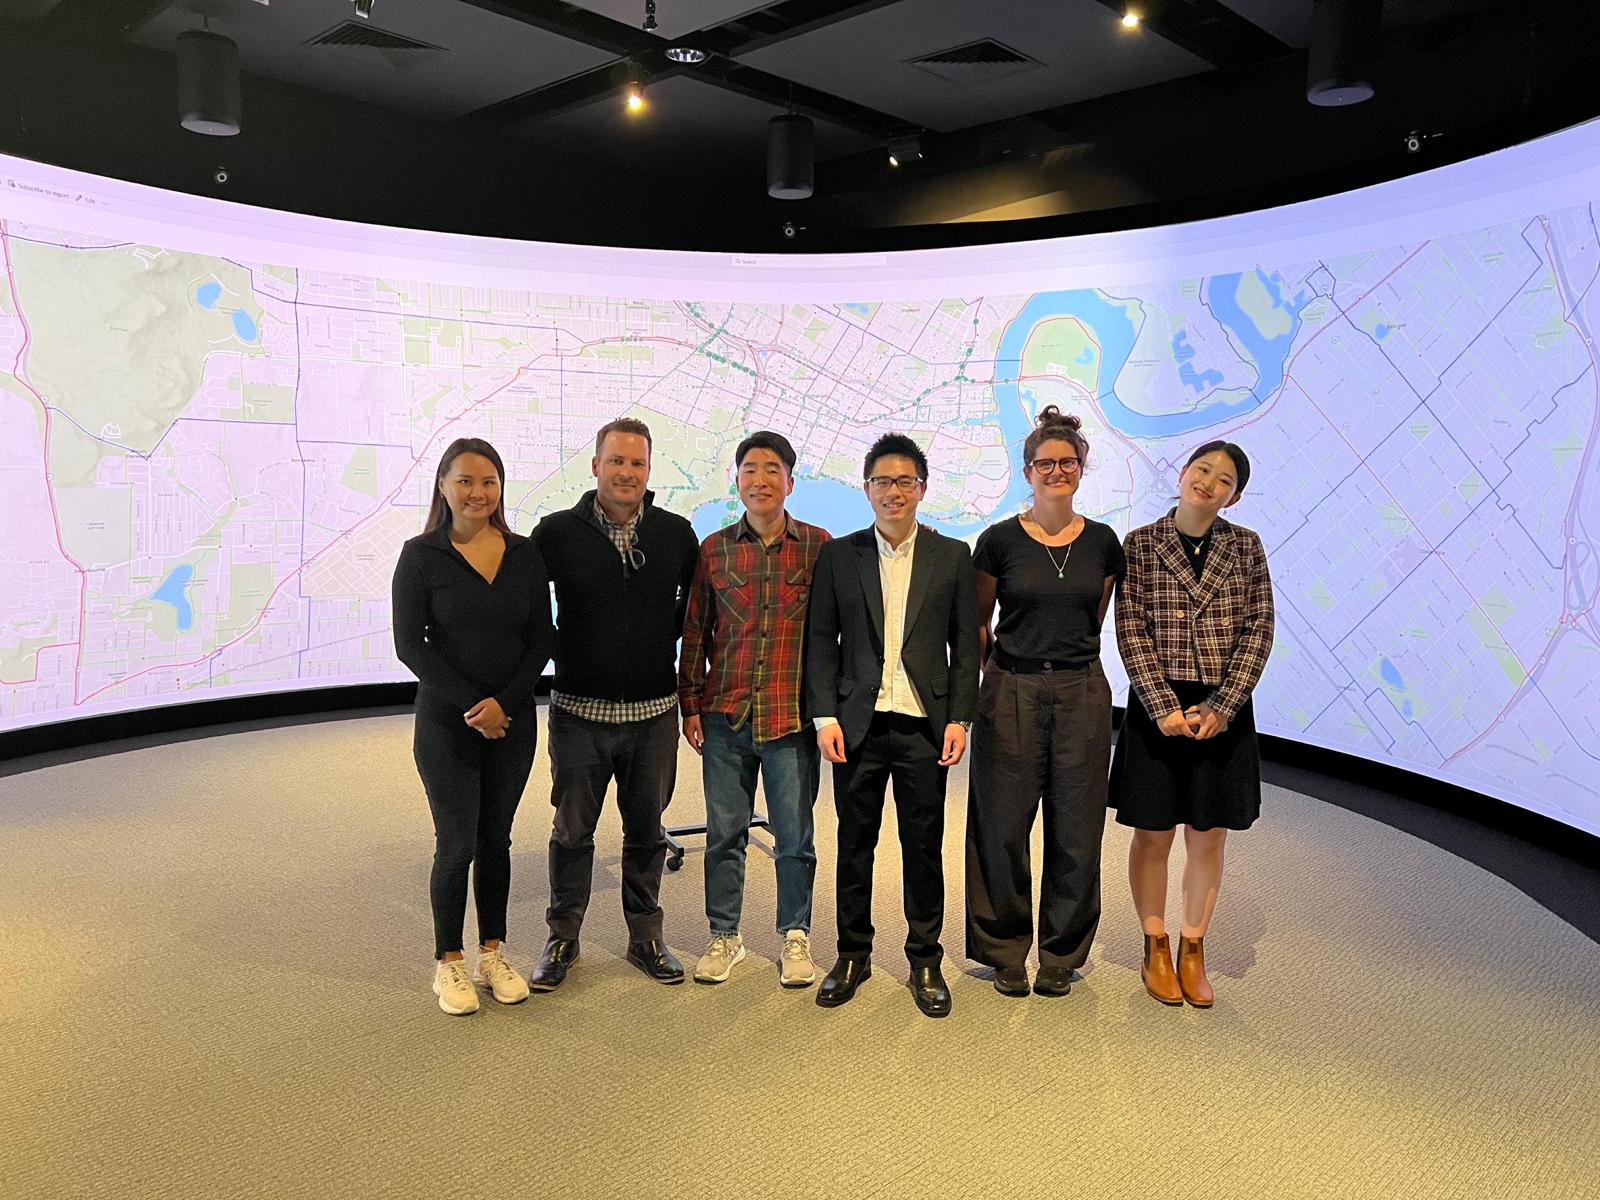 Group of people standing in front of a massive curved screen with a map of Perth on it.